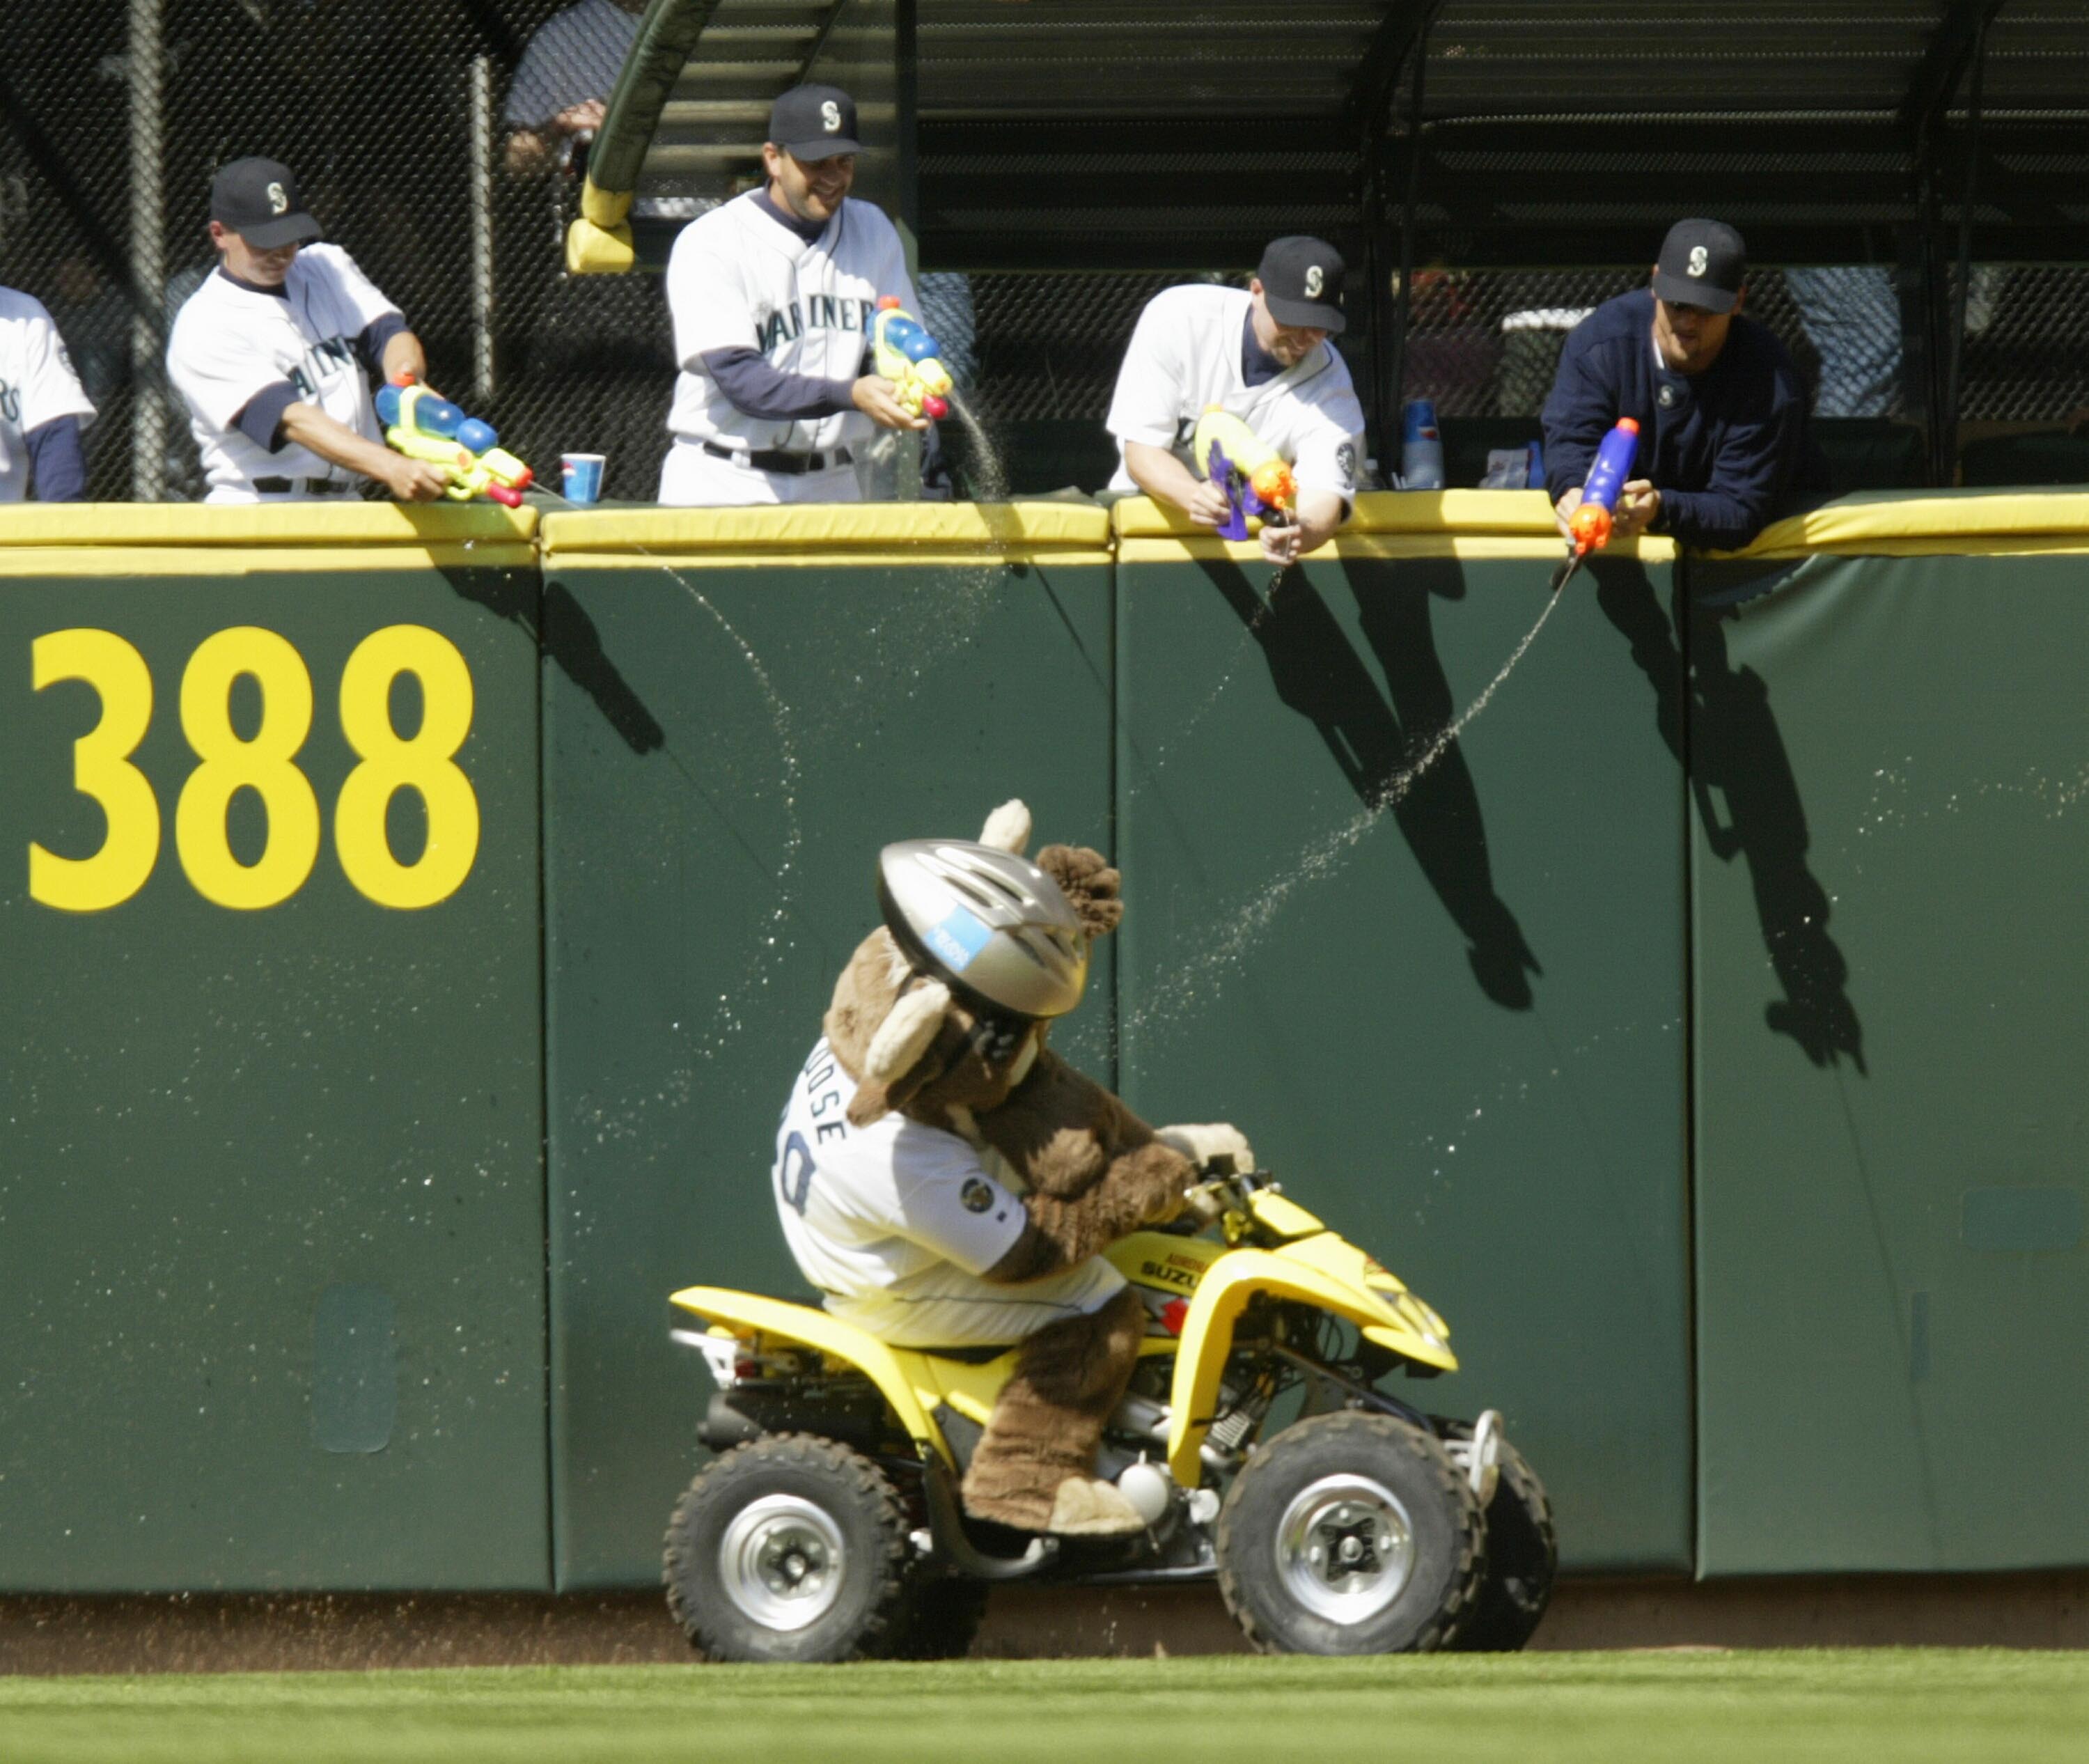 SEATTLE - APRIL 22:  Members of the Seattle Mariners' bullpen, armed with squirt guns, fire upon the team mascot 'Mariner Moose' as he makes his traditional lap around the field during the seventh inning stretch against the Oakland Athletics on April 22,